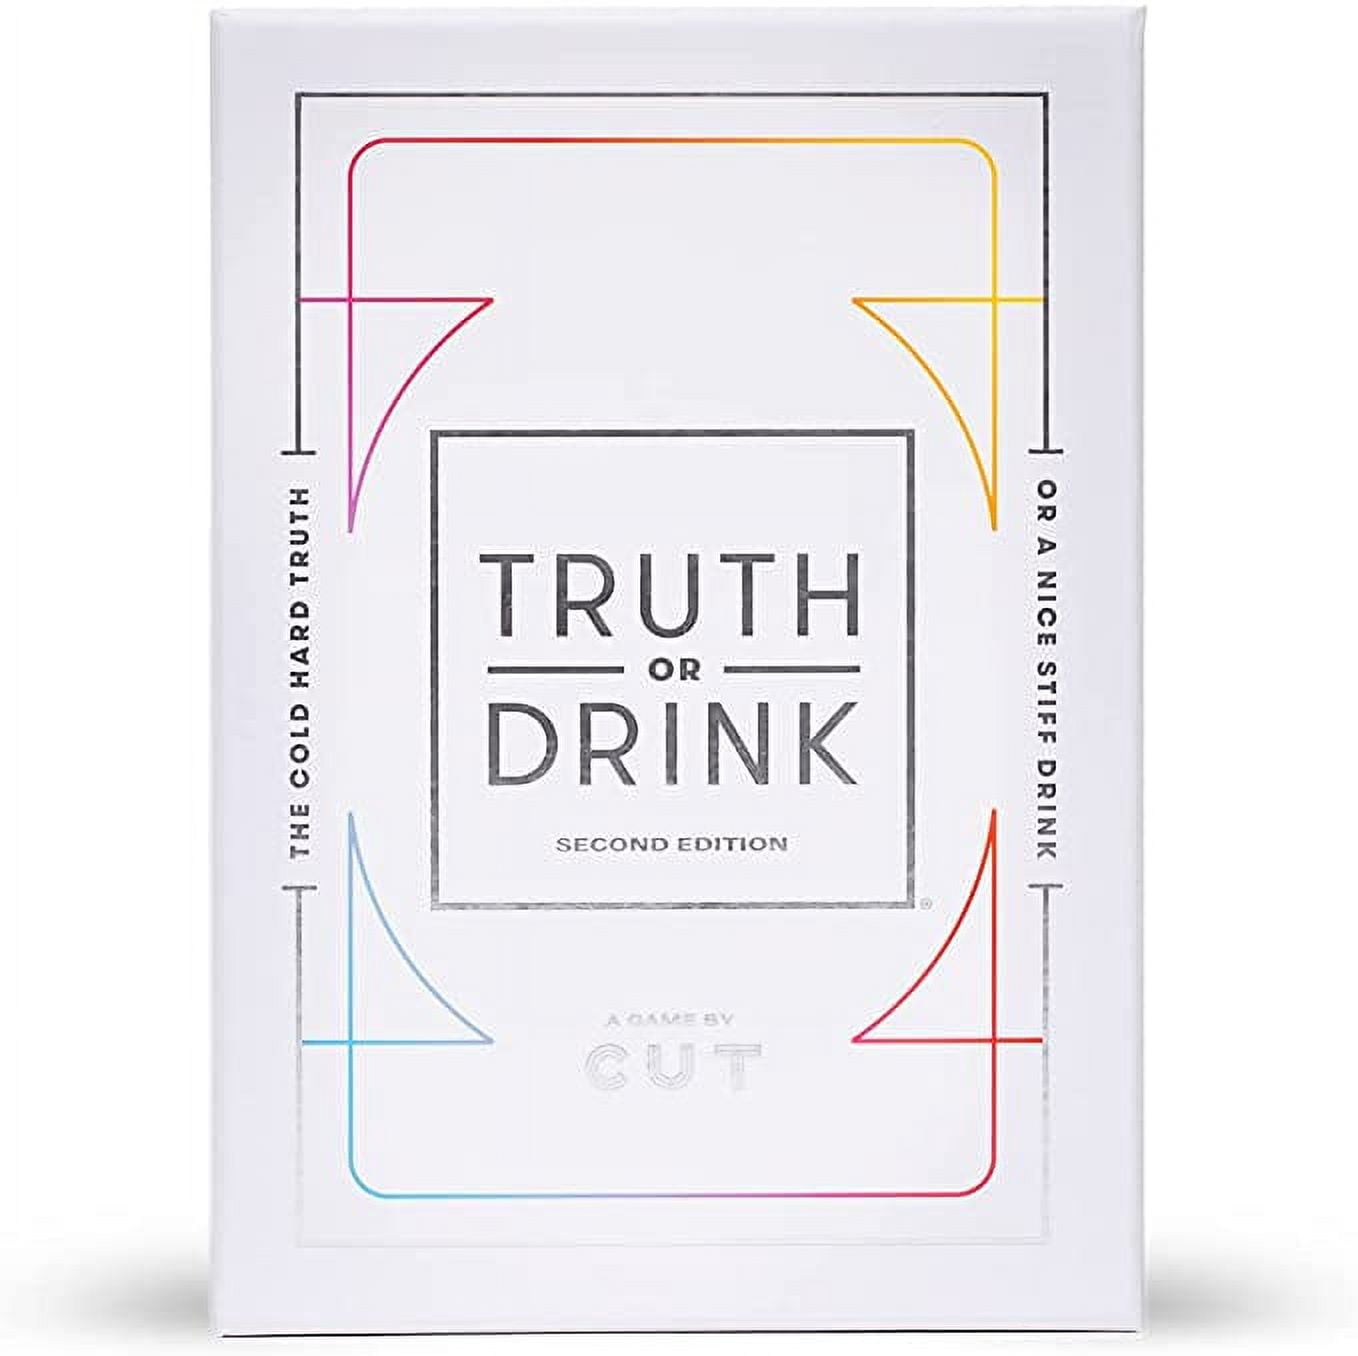 TEXT IT OR DRINK IT - Drinking Game!